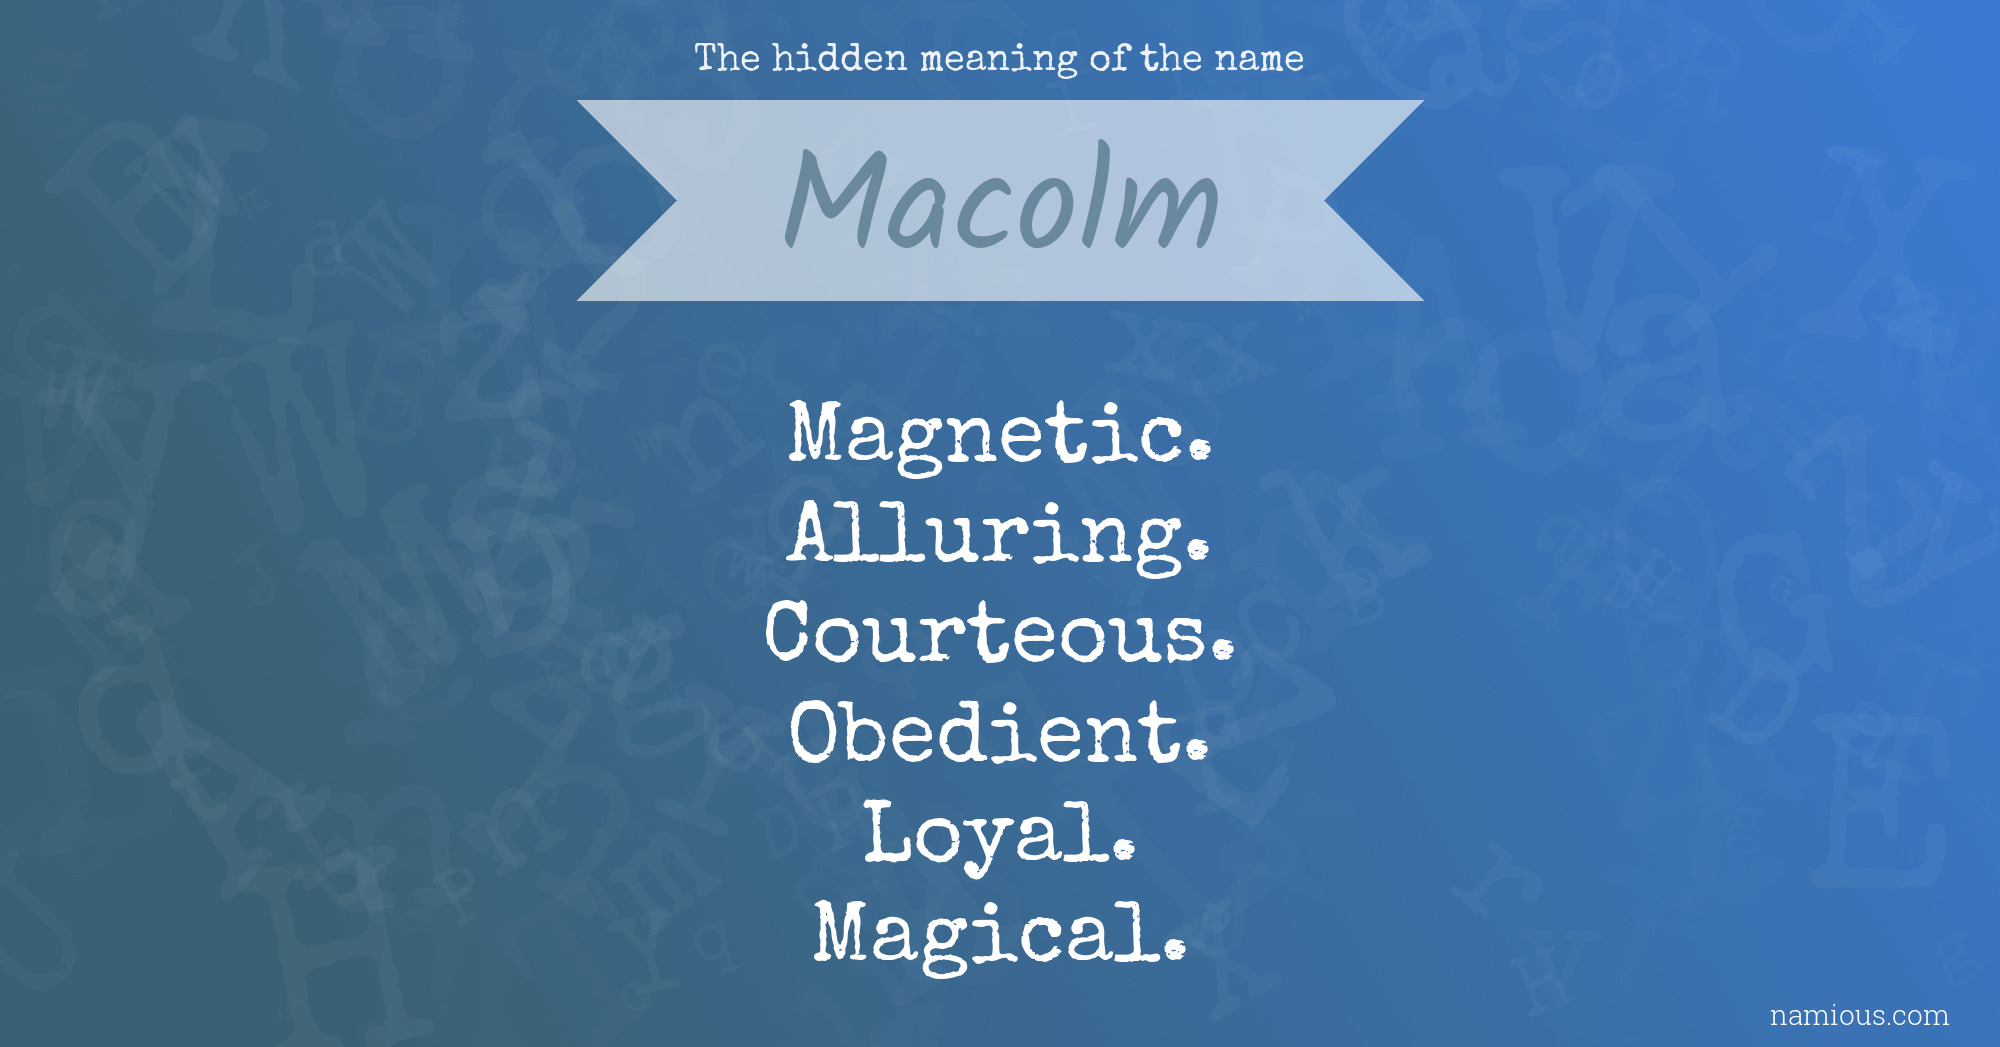 The hidden meaning of the name Macolm